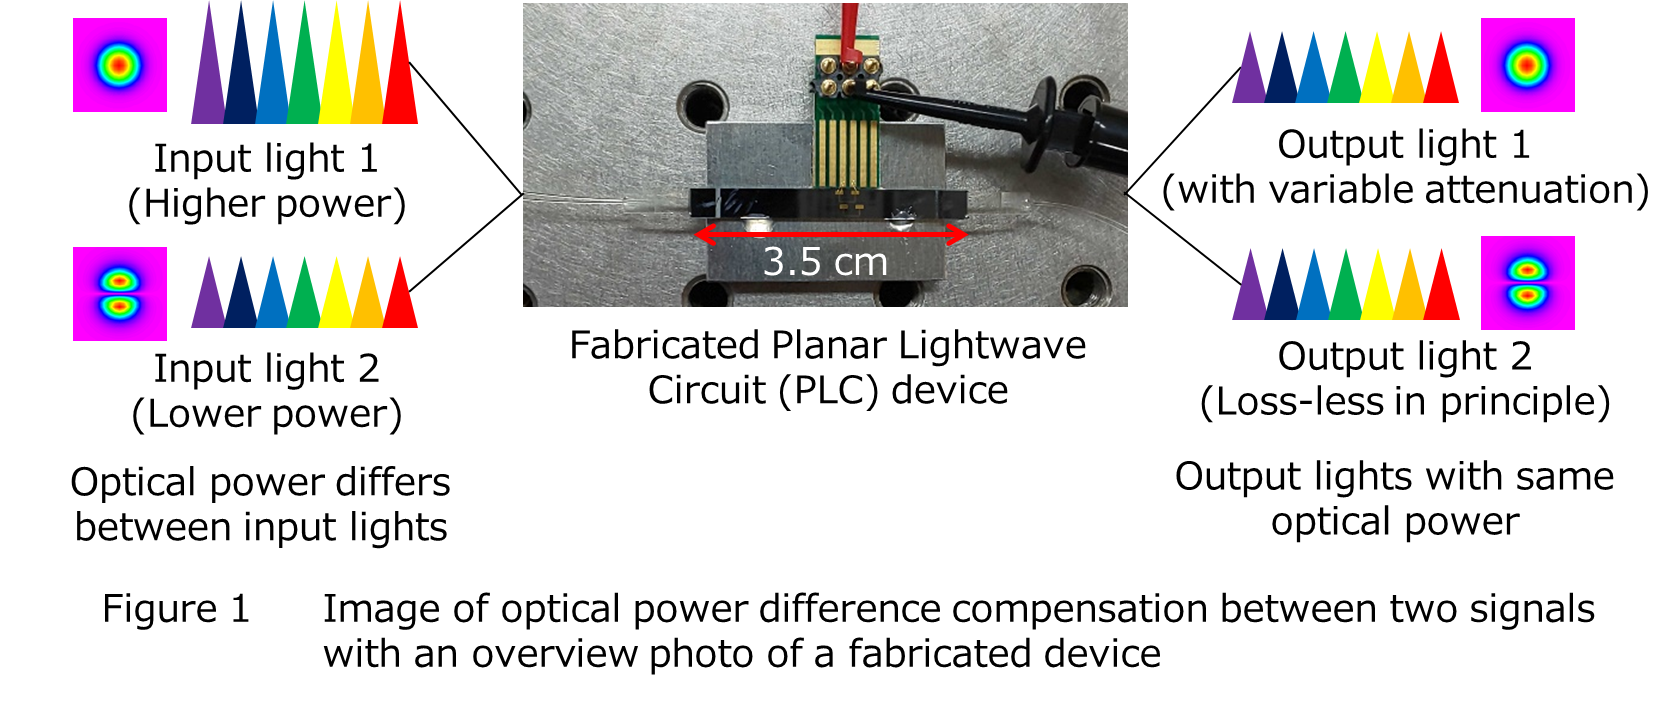 Figure 1 Image of optical power difference compensation between two signals with an overview photo of a fabricated device